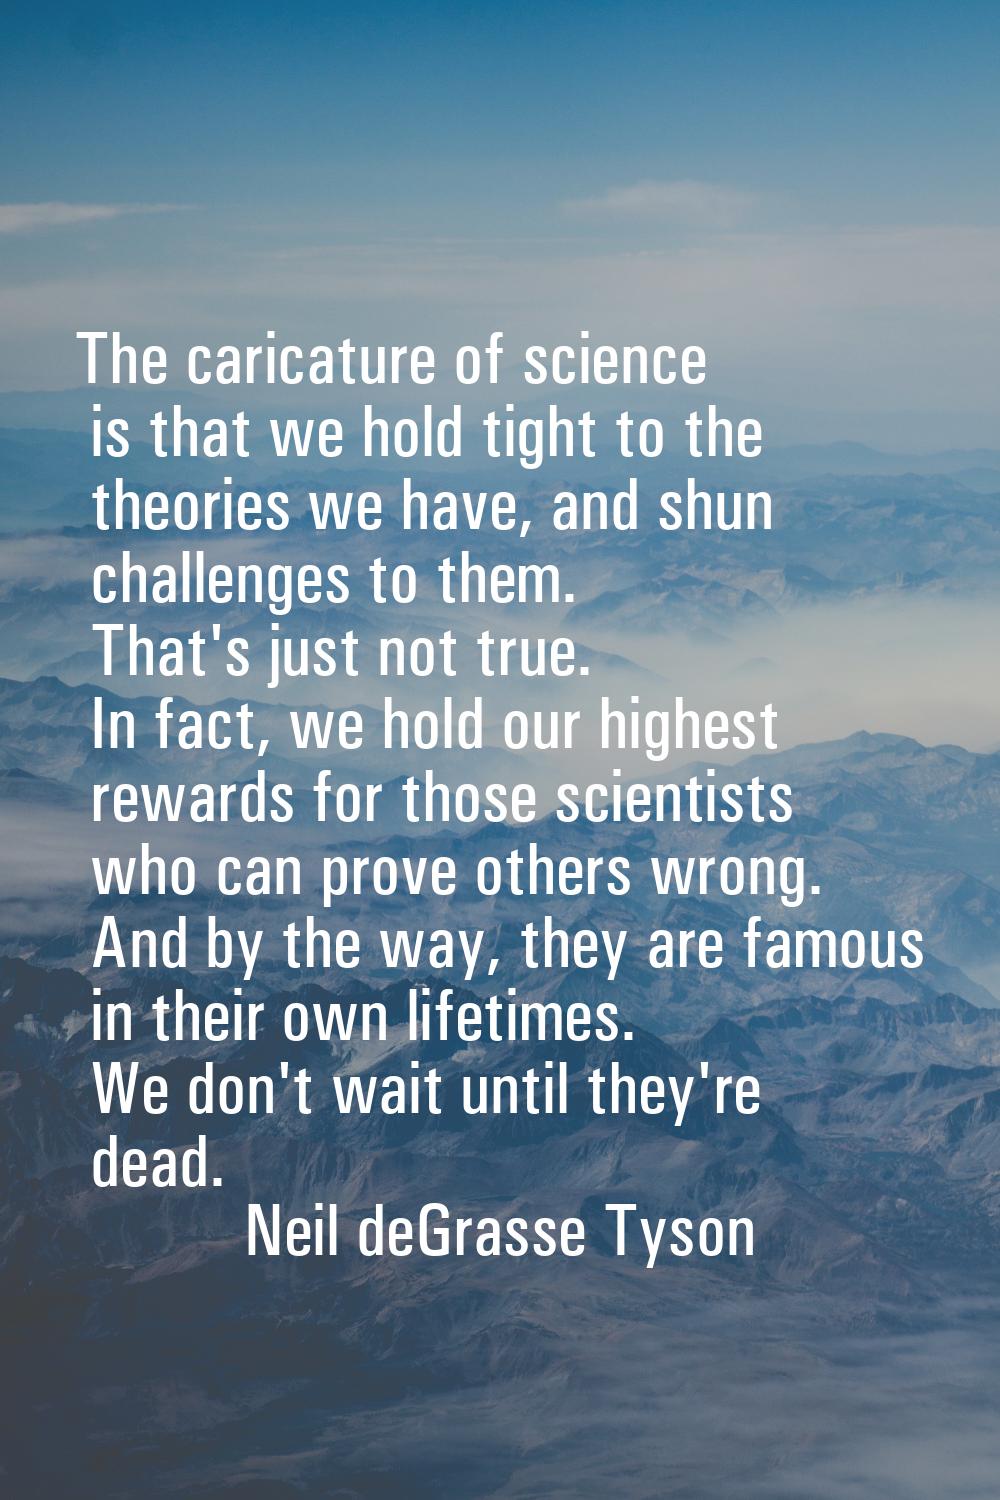 The caricature of science is that we hold tight to the theories we have, and shun challenges to the